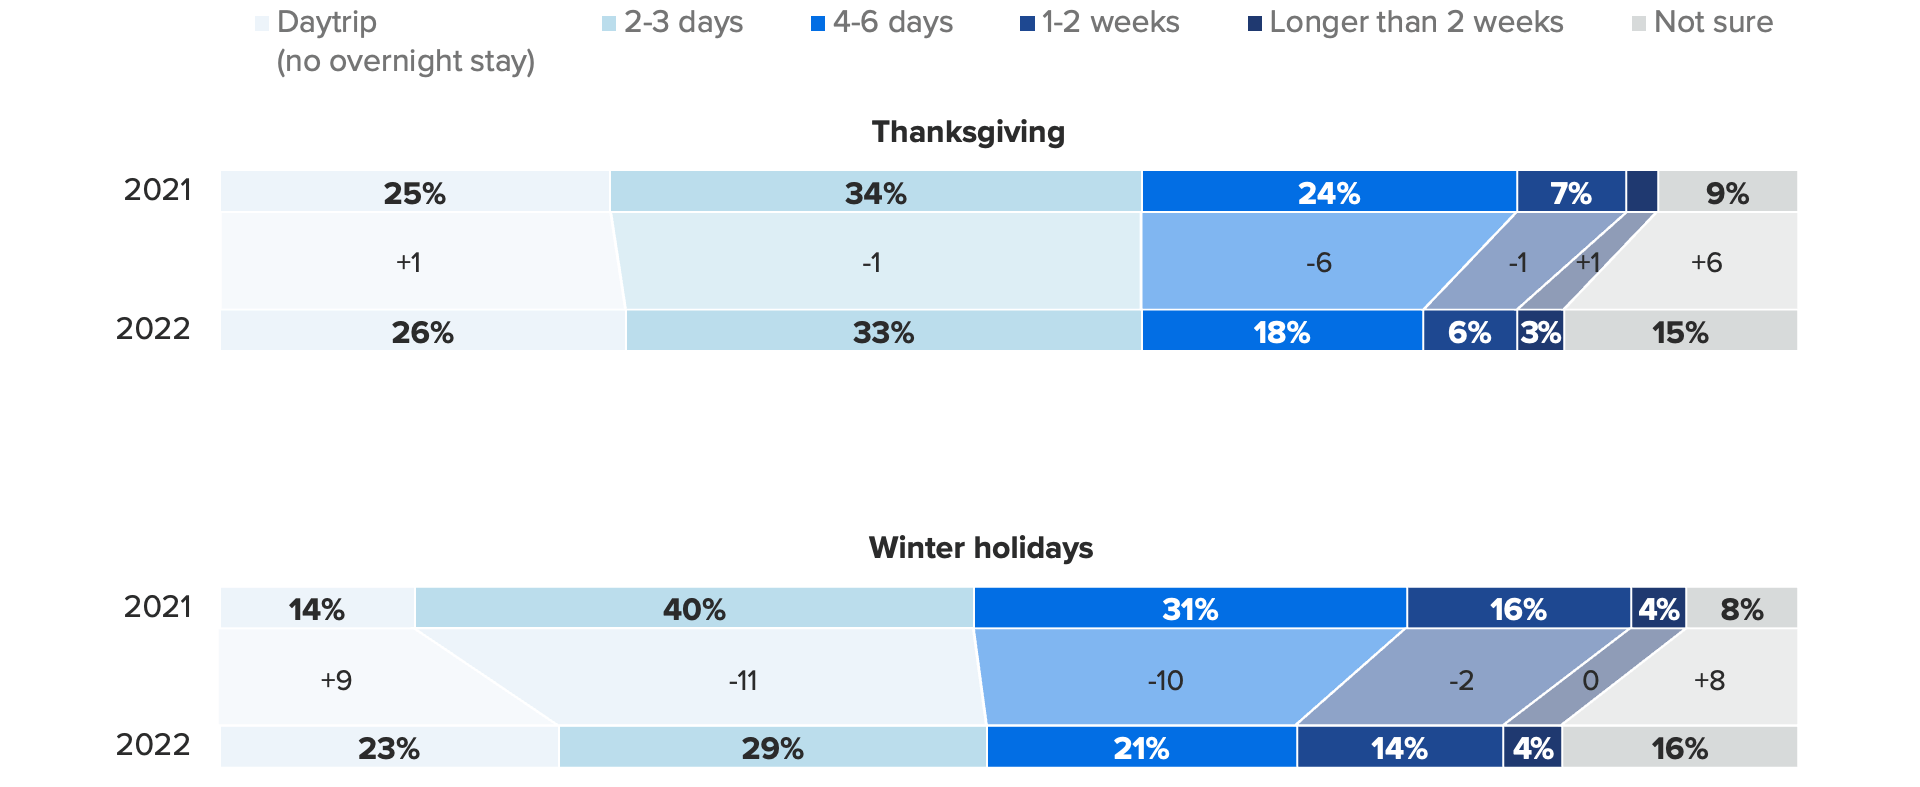 Bar chart of the length of holiday travel plans showing travelers are planning shorter trips this year.